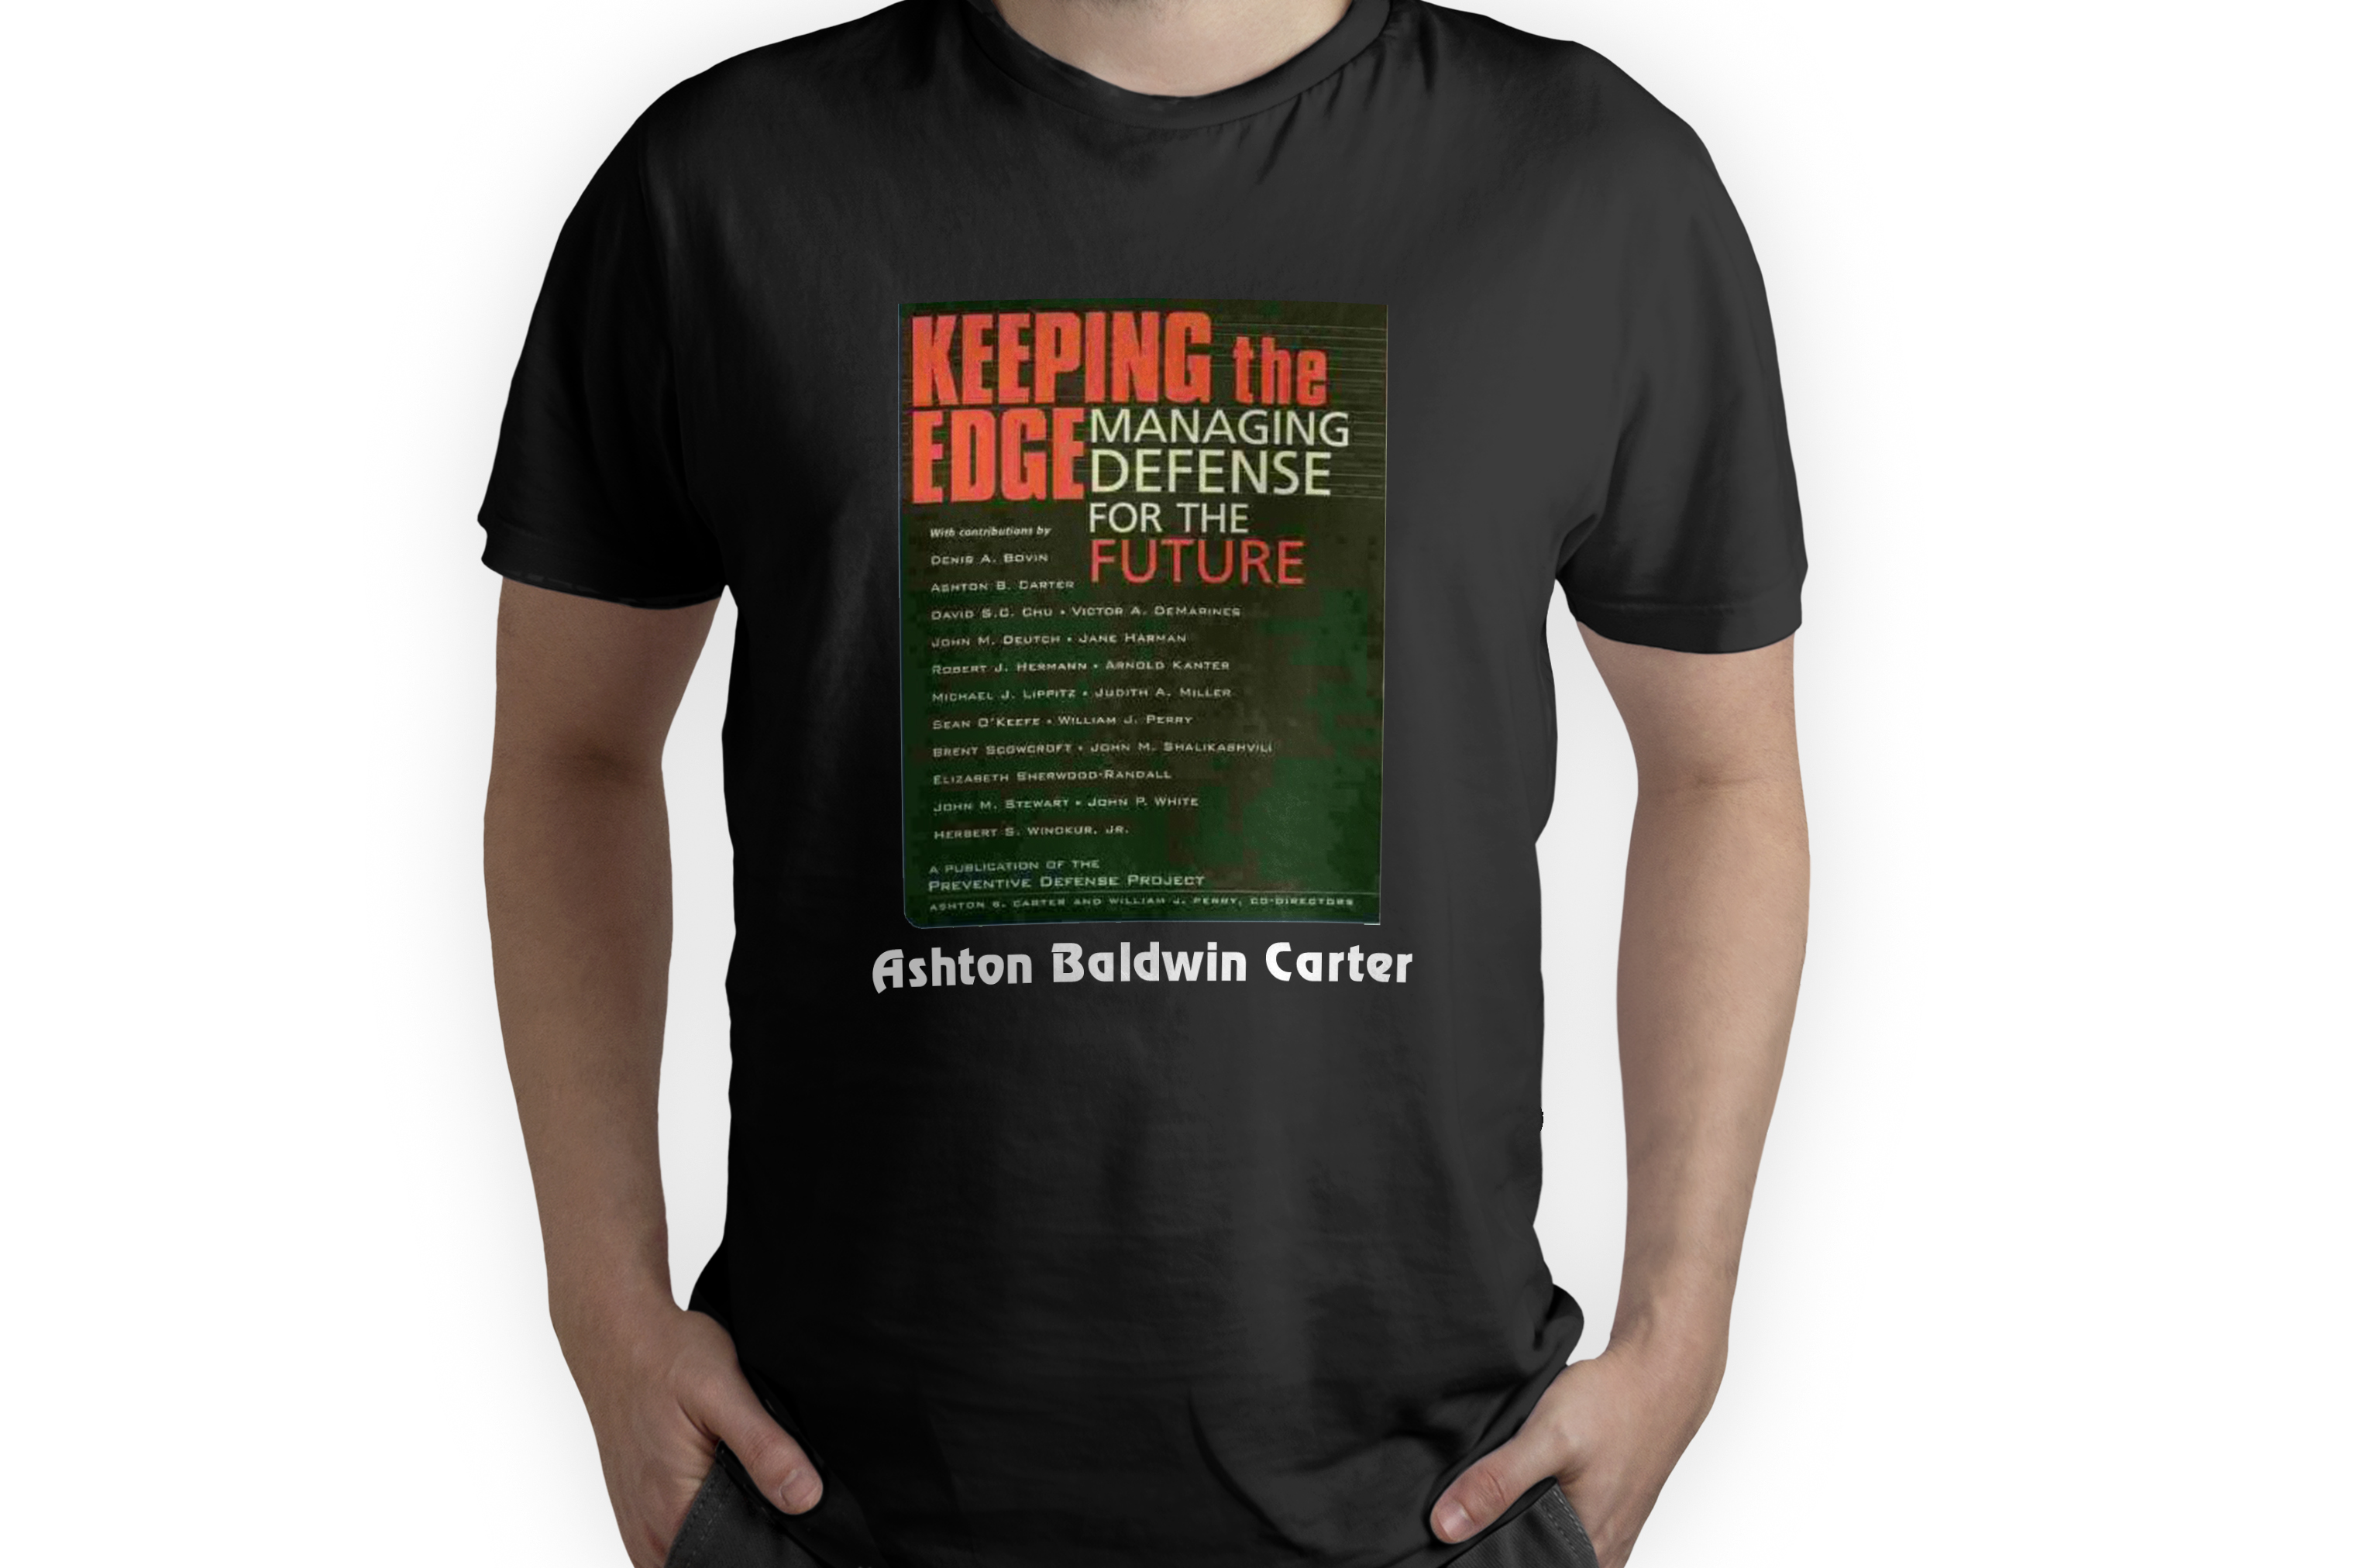 Ash B Carter Shirts - Keeping The Edge Managing Defense For The Future Shirt Size Up To 5xl | Trending Shirts